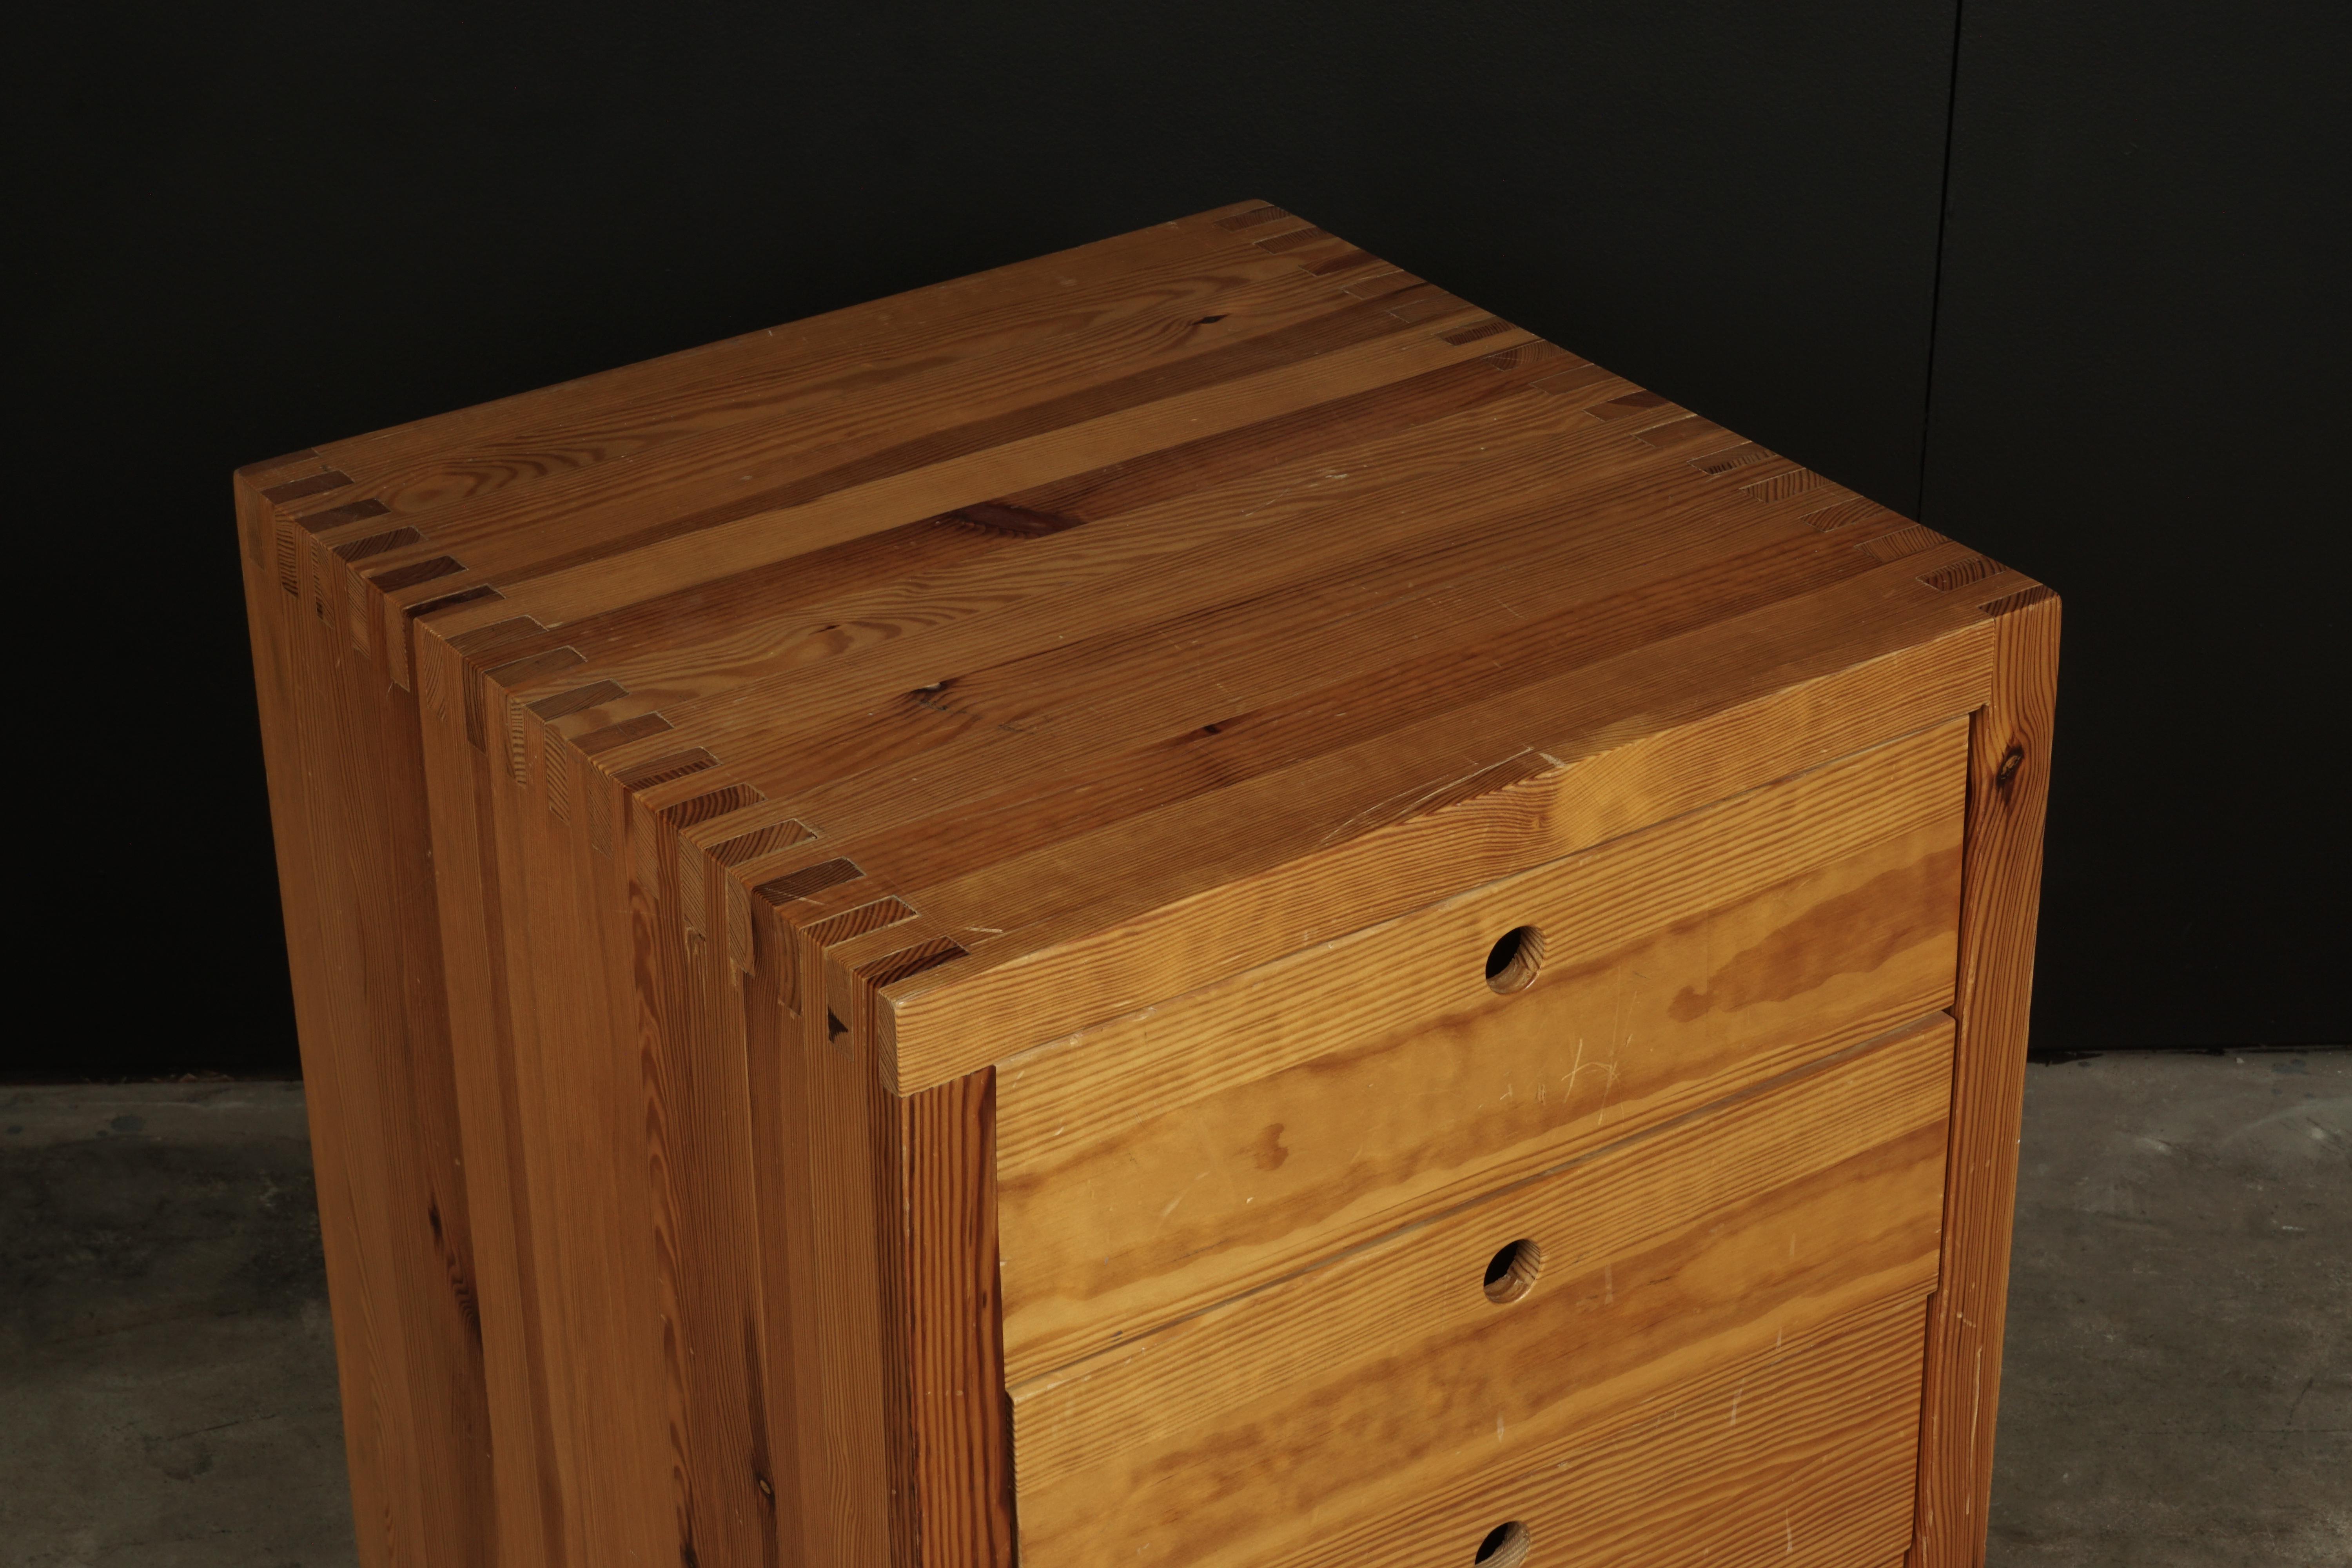 Vintage bas van pelt chest of drawers from Netherlands, circa 1960. Solid pine construction with light wear and patina.